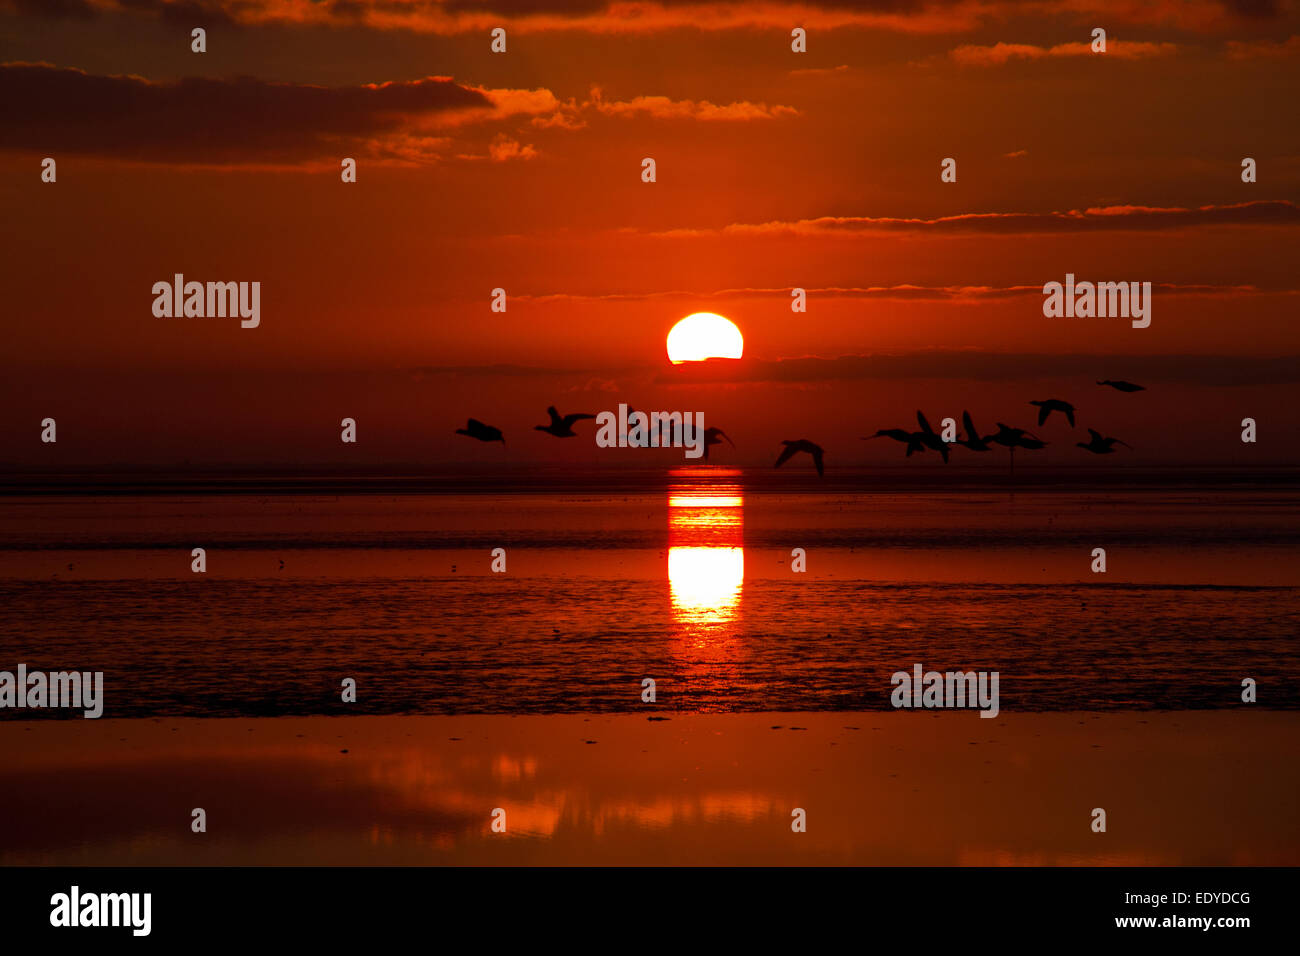 Geese flying in front of the rising sun above the sea Stock Photo